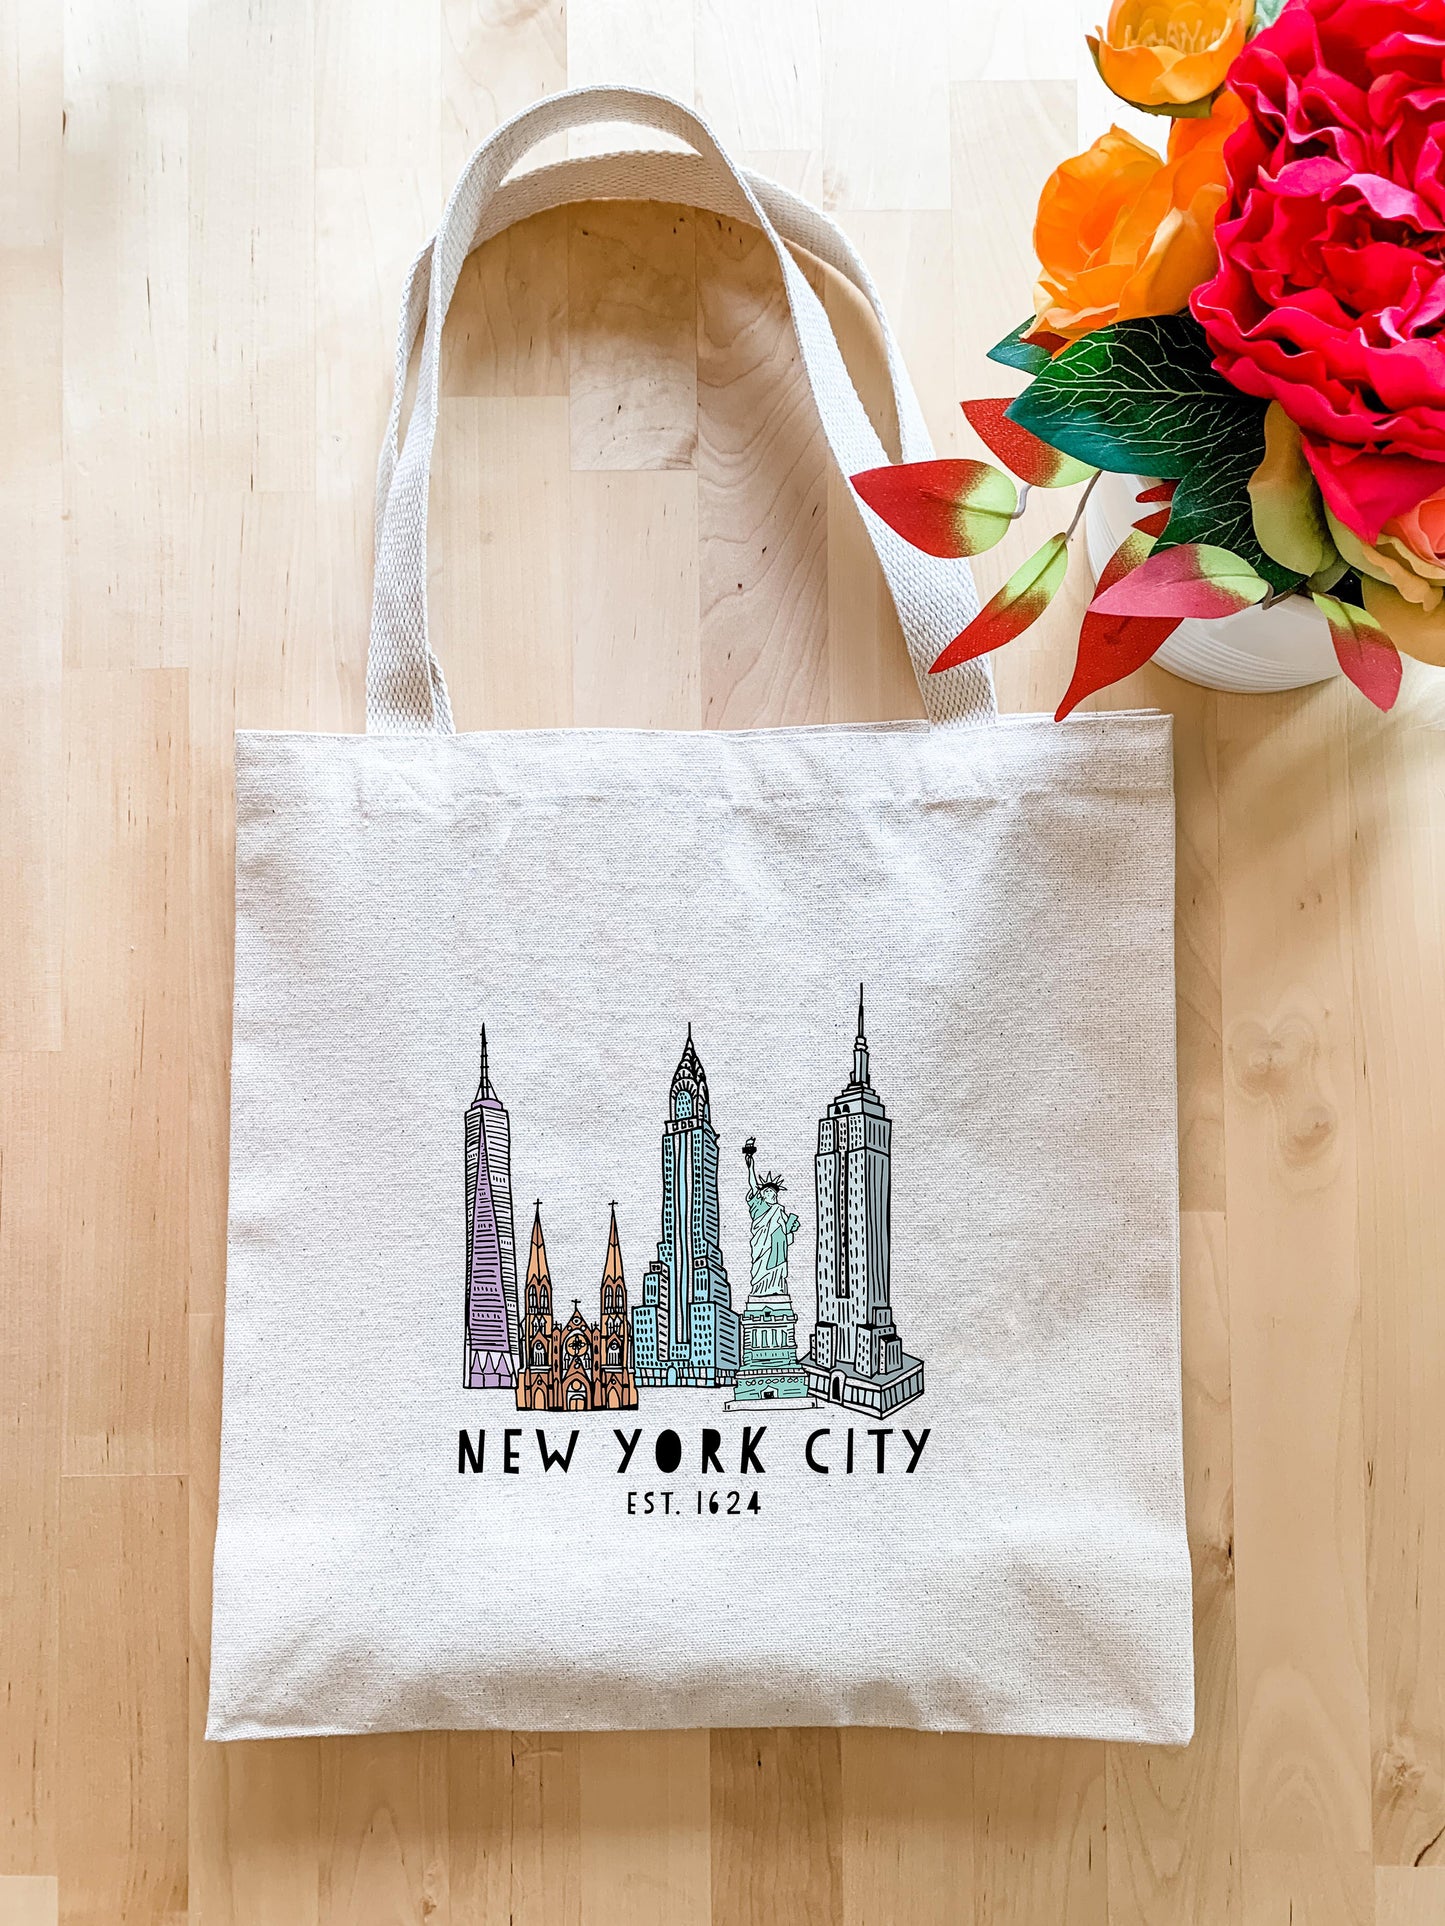 a new york city bag next to a bouquet of flowers